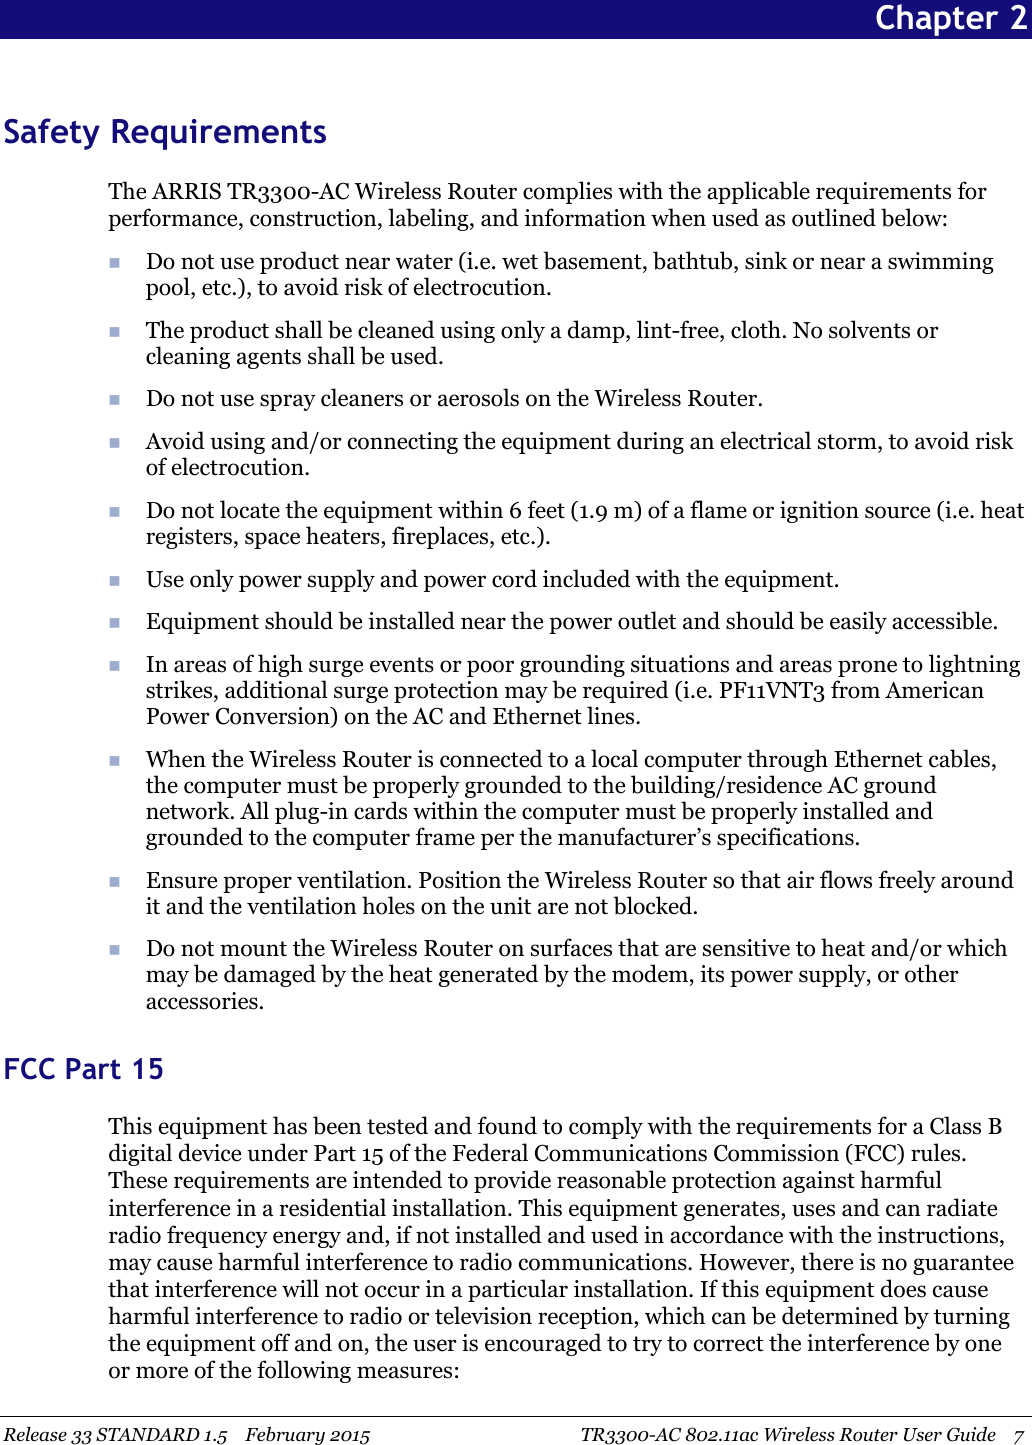 Release 33 STANDARD 1.5 February 2015 TR3300-AC 802.11ac Wireless Router User Guide 7Chapter 2Safety RequirementsThe ARRIS TR3300-AC Wireless Router complies with the applicable requirements forperformance, construction, labeling, and information when used as outlined below:Do not use product near water (i.e. wet basement, bathtub, sink or near a swimmingpool, etc.), to avoid risk of electrocution.The product shall be cleaned using only a damp, lint-free, cloth. No solvents orcleaning agents shall be used.Do not use spray cleaners or aerosols on the Wireless Router.Avoid using and/or connecting the equipment during an electrical storm, to avoid riskof electrocution.Do not locate the equipment within 6 feet (1.9 m) of a flame or ignition source (i.e. heatregisters, space heaters, fireplaces, etc.).Use only power supply and power cord included with the equipment.Equipment should be installed near the power outlet and should be easily accessible.In areas of high surge events or poor grounding situations and areas prone to lightningstrikes, additional surge protection may be required (i.e. PF11VNT3 from AmericanPower Conversion) on the AC and Ethernet lines.When the Wireless Router is connected to a local computer through Ethernet cables,the computer must be properly grounded to the building/residence AC groundnetwork. All plug-in cards within the computer must be properly installed andgrounded to the computer frame per the manufacturer’s specifications.Ensure proper ventilation. Position the Wireless Router so that air flows freely aroundit and the ventilation holes on the unit are not blocked.Do not mount the Wireless Router on surfaces that are sensitive to heat and/or whichmay be damaged by the heat generated by the modem, its power supply, or otheraccessories.FCC Part 15This equipment has been tested and found to comply with the requirements for a Class Bdigital device under Part 15 of the Federal Communications Commission (FCC) rules.These requirements are intended to provide reasonable protection against harmfulinterference in a residential installation. This equipment generates, uses and can radiateradio frequency energy and, if not installed and used in accordance with the instructions,may cause harmful interference to radio communications. However, there is no guaranteethat interference will not occur in a particular installation. If this equipment does causeharmful interference to radio or television reception, which can be determined by turningthe equipment off and on, the user is encouraged to try to correct the interference by oneor more of the following measures: